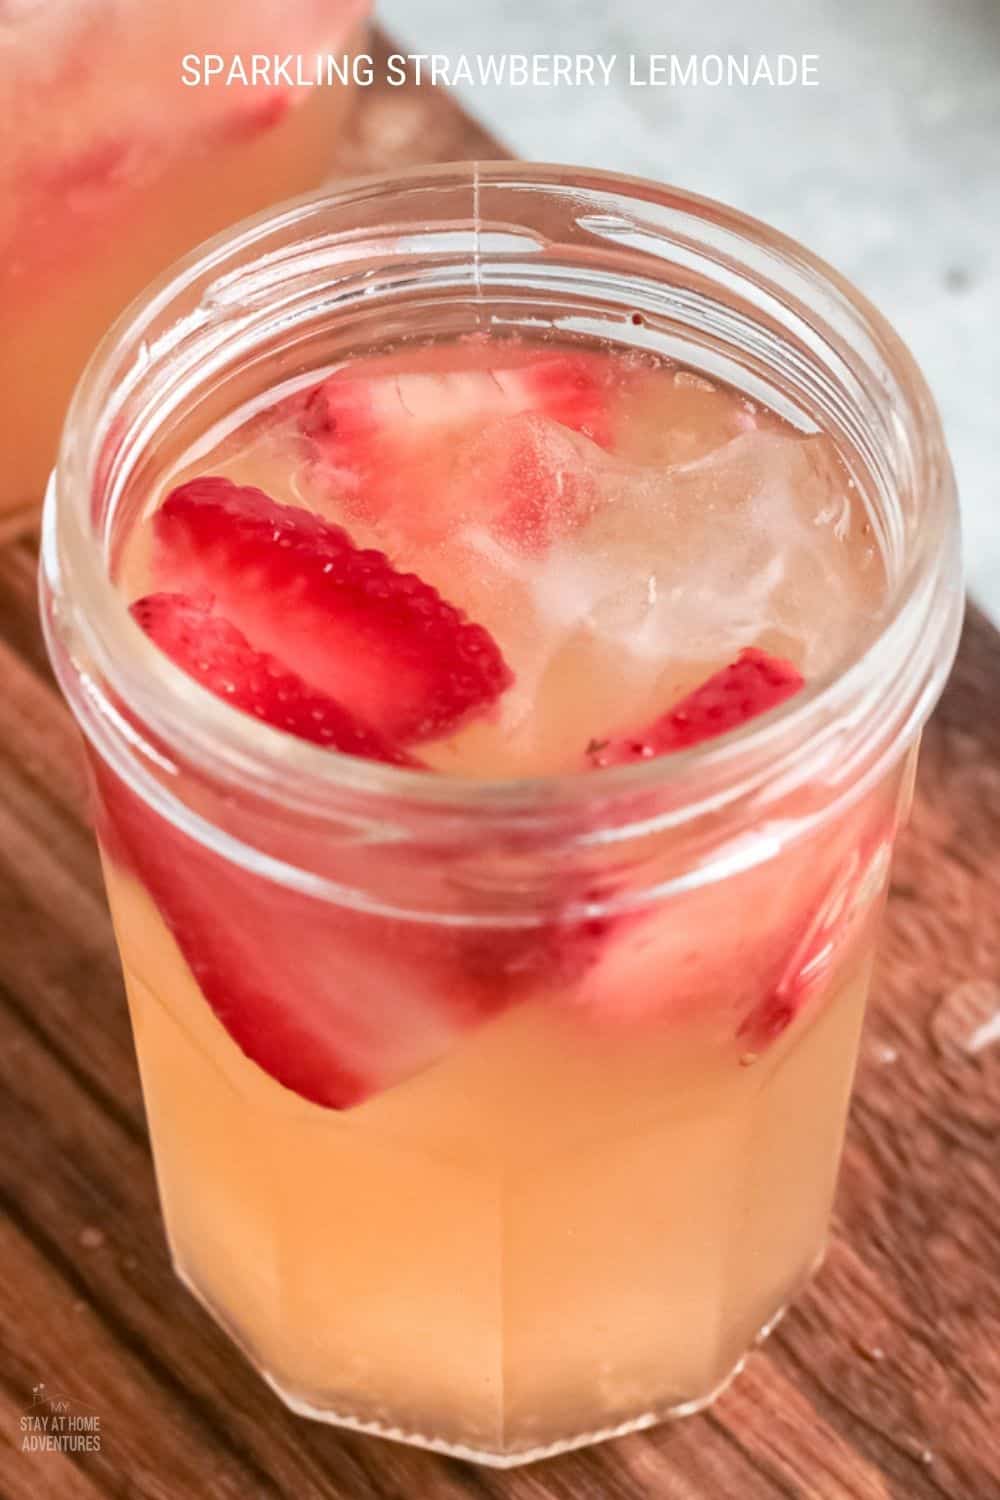 If you want to enjoy a refreshing drink this summer, then try strawberry lemonade. This sparkling beverage is perfect for your next barbecue or family get-together. Whip up a batch today! via @mystayathome